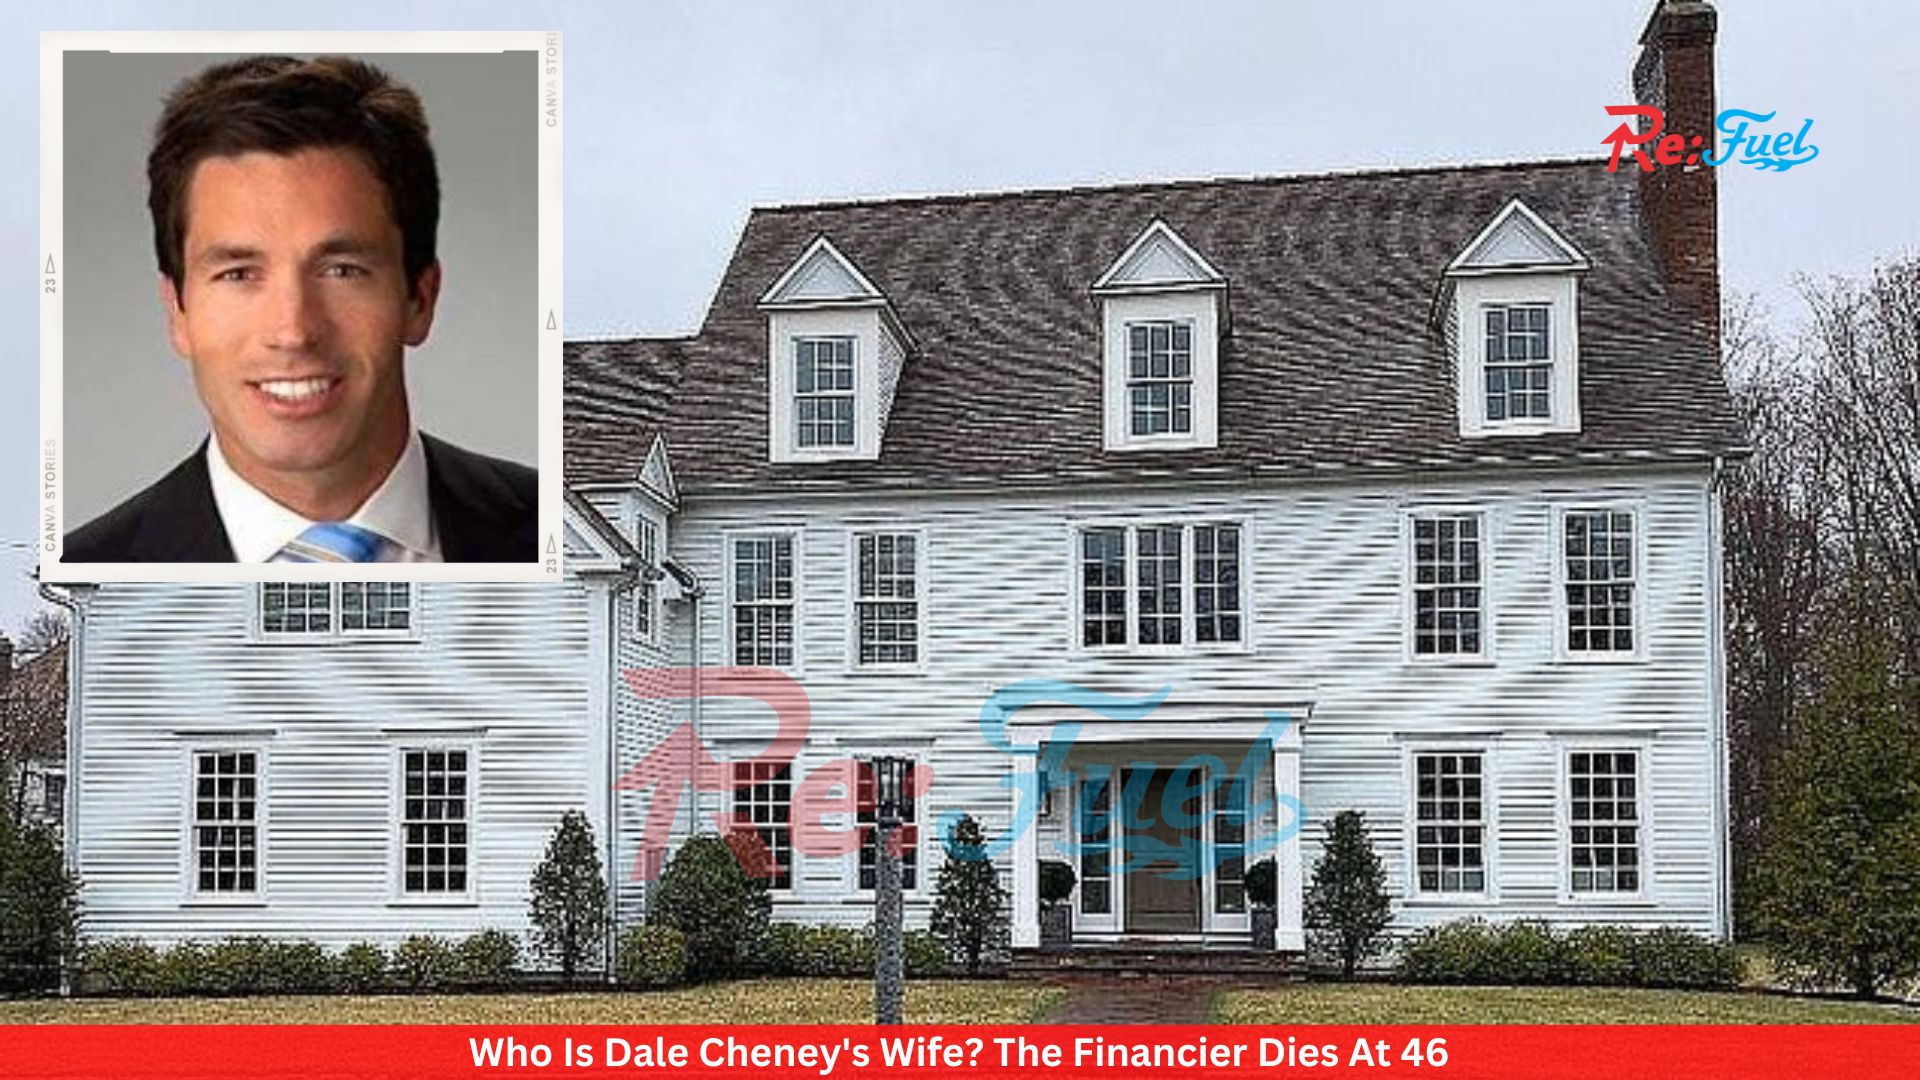 Who Is Dale Cheney's Wife? The Financier Dies At 46